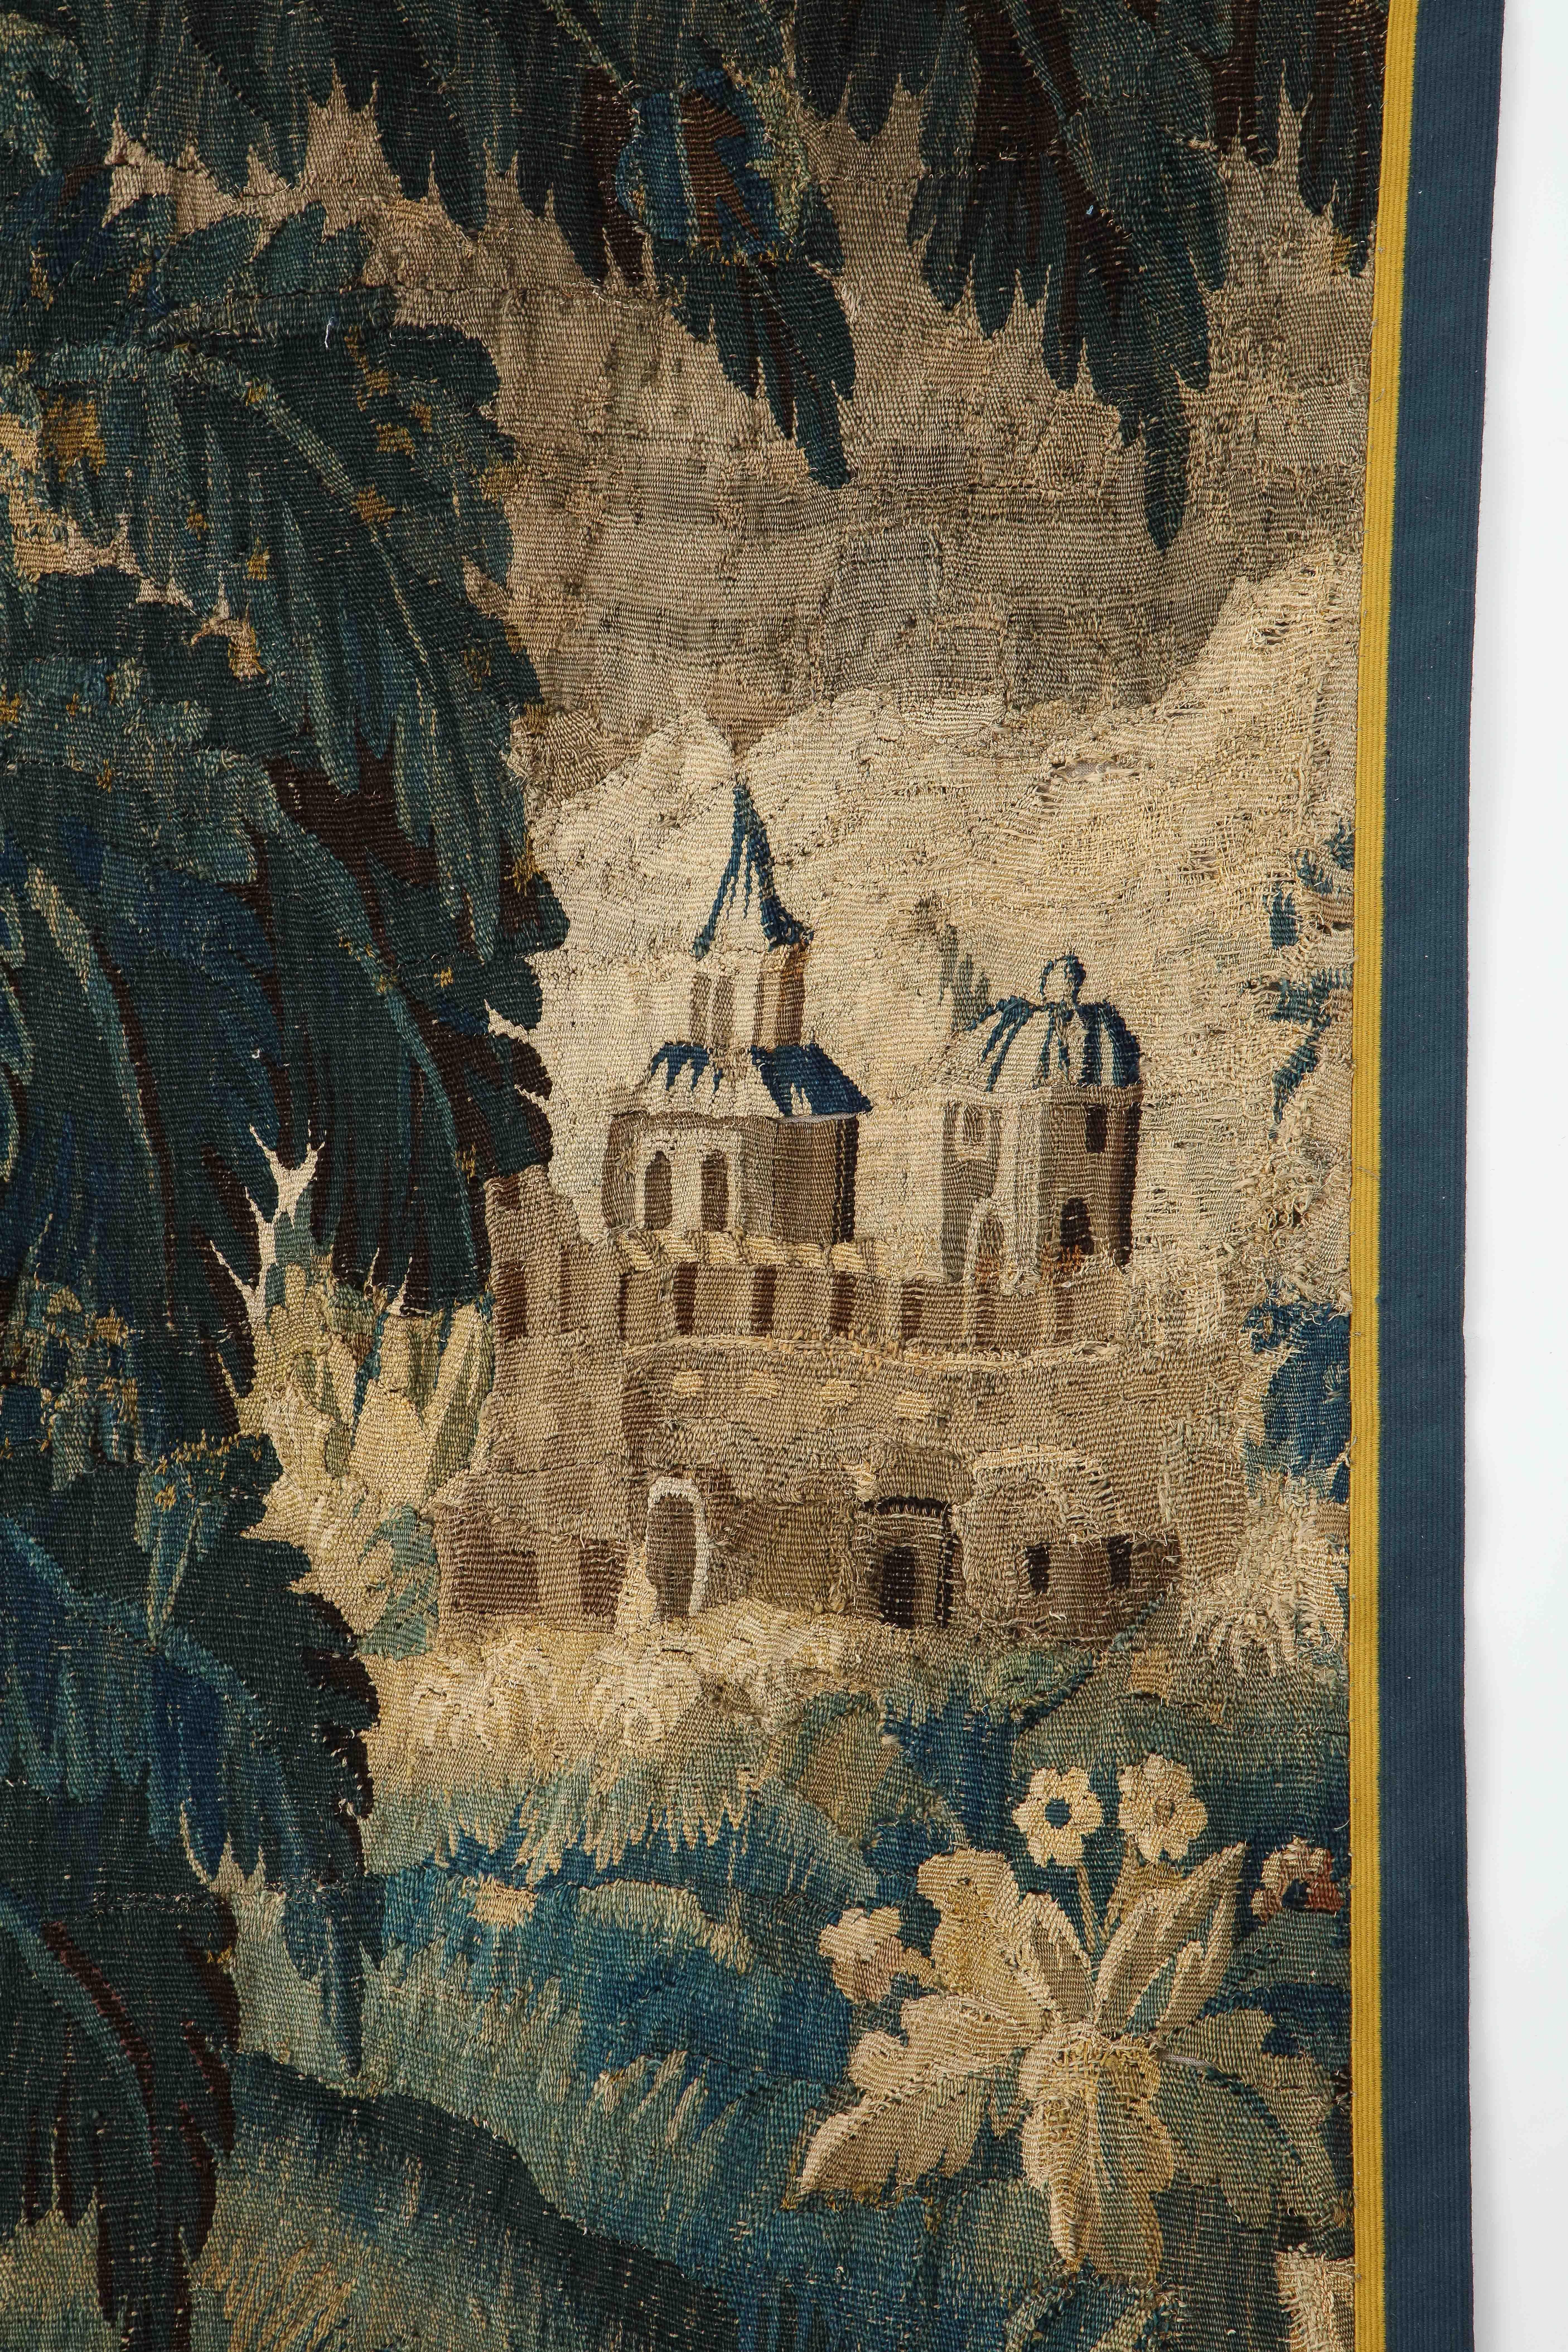 An 18th century verdure Aubusson tapestry handwoven in wool. This scenic landscape depicts a charming scene with a castle in the background and. large trees and flowering plants along side a feeding heron in the foreground. This is one of two panels